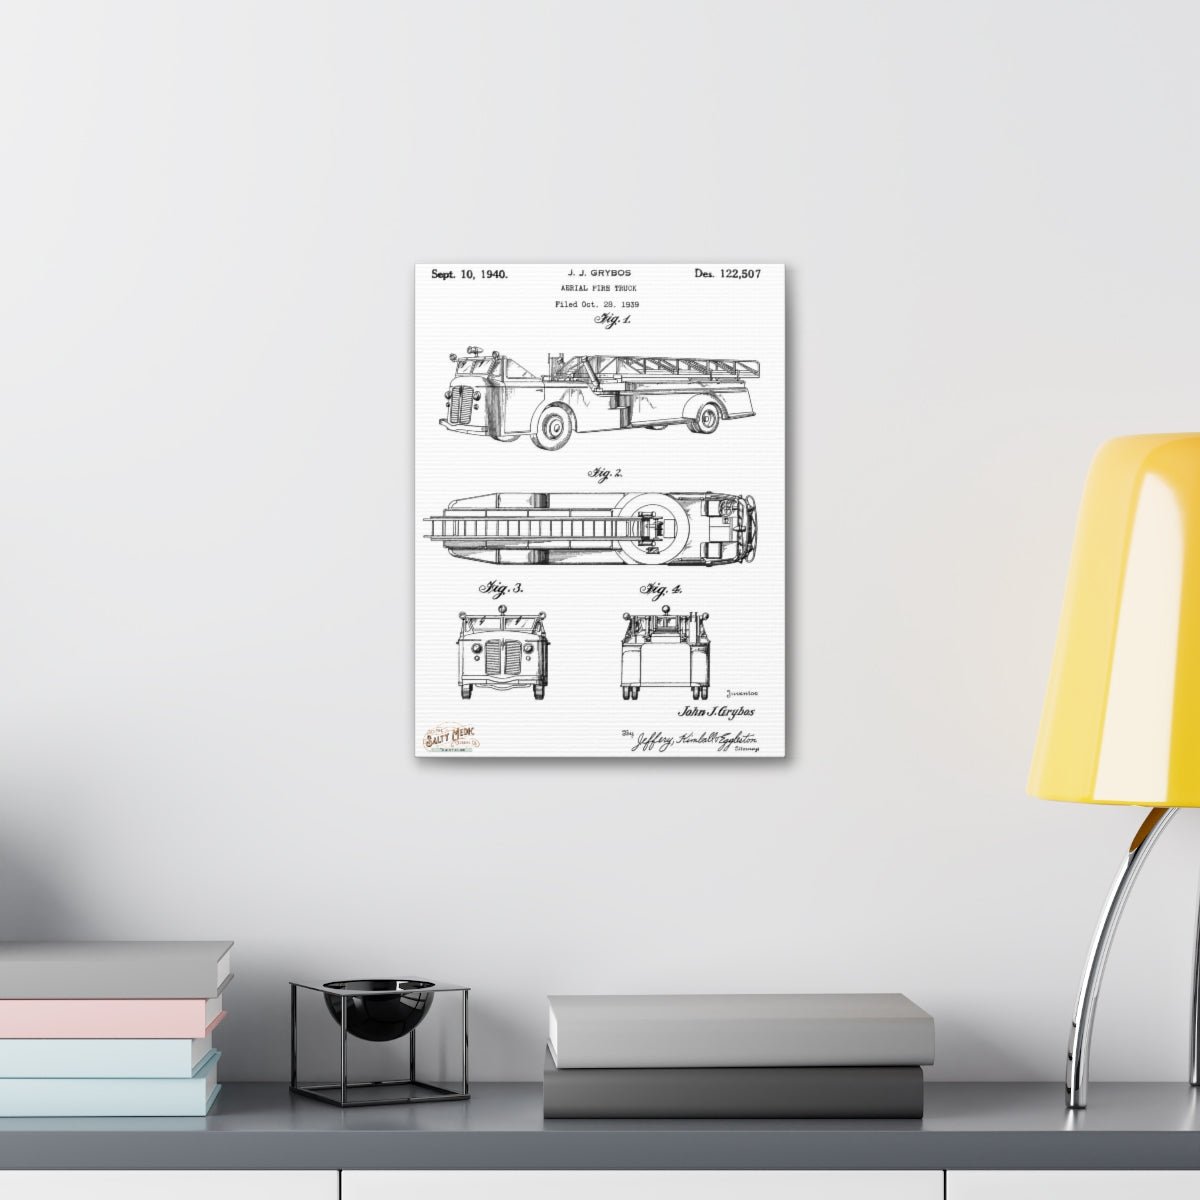 1940 Aerial Fire Truck Patent Wall Art Stretched Canvas, 1.5'' - Salty Medic Clothing Co.